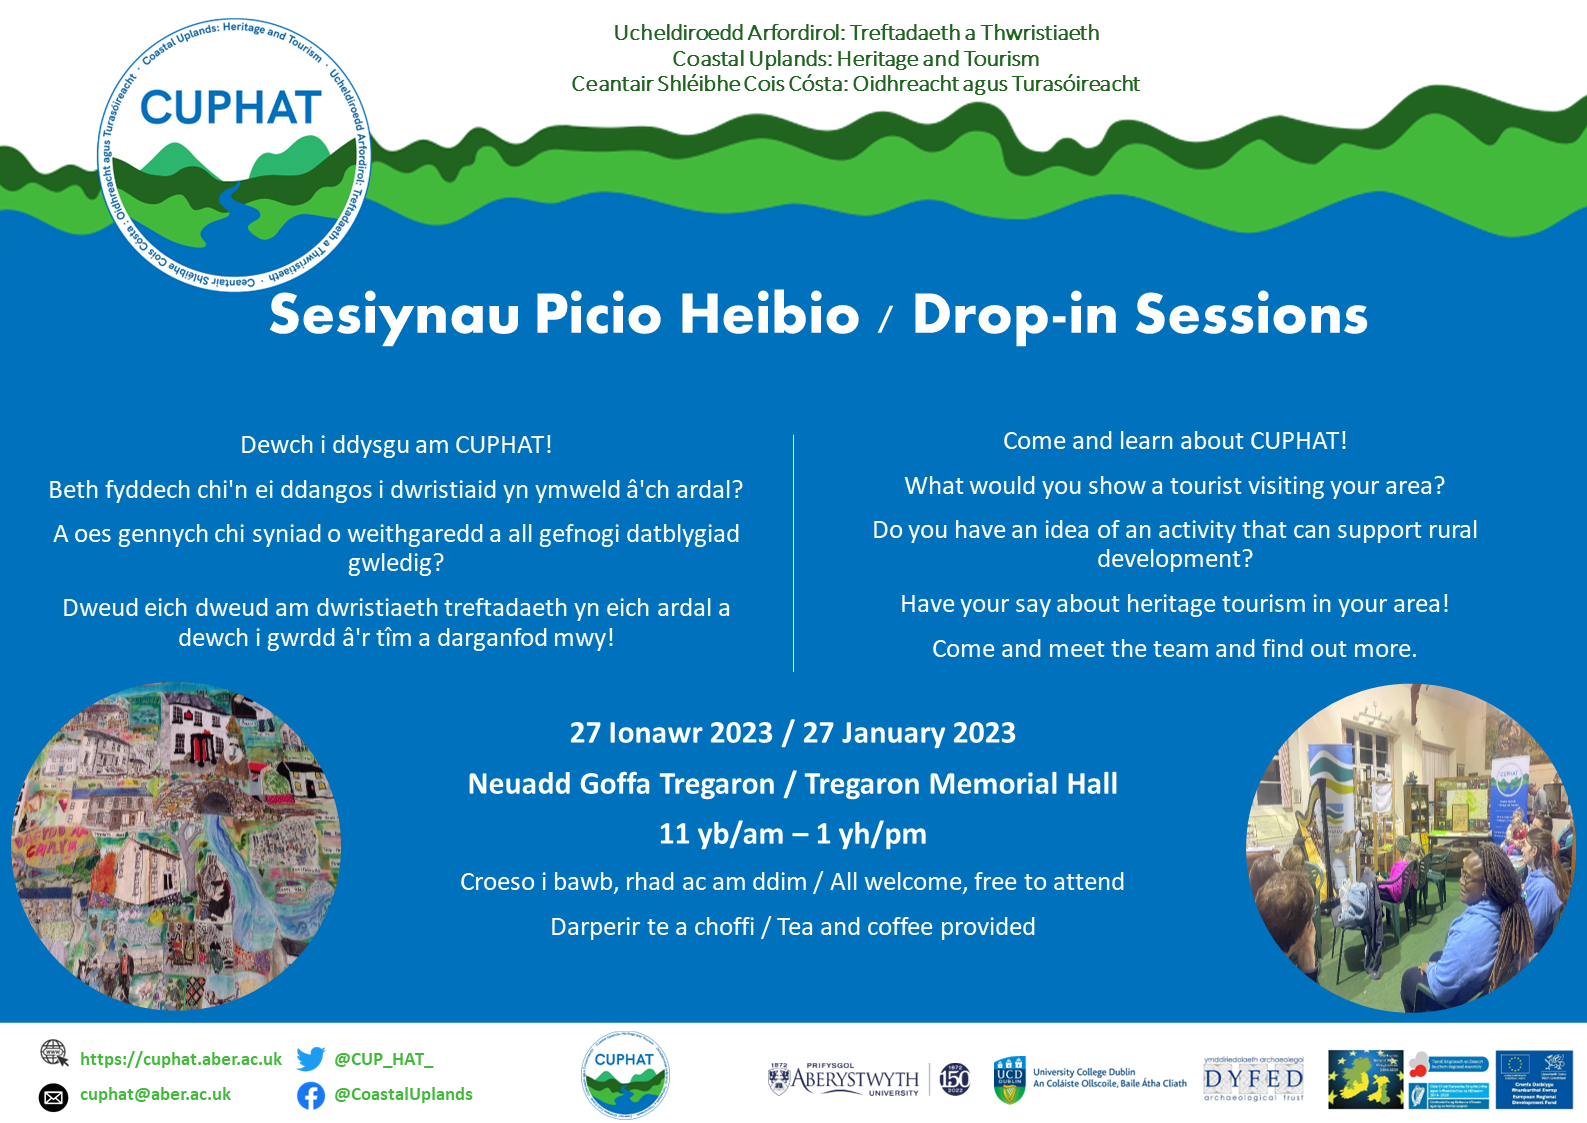 Information for community drop-in event on 27 January 2023 in the Cambrian Mountains, Wales